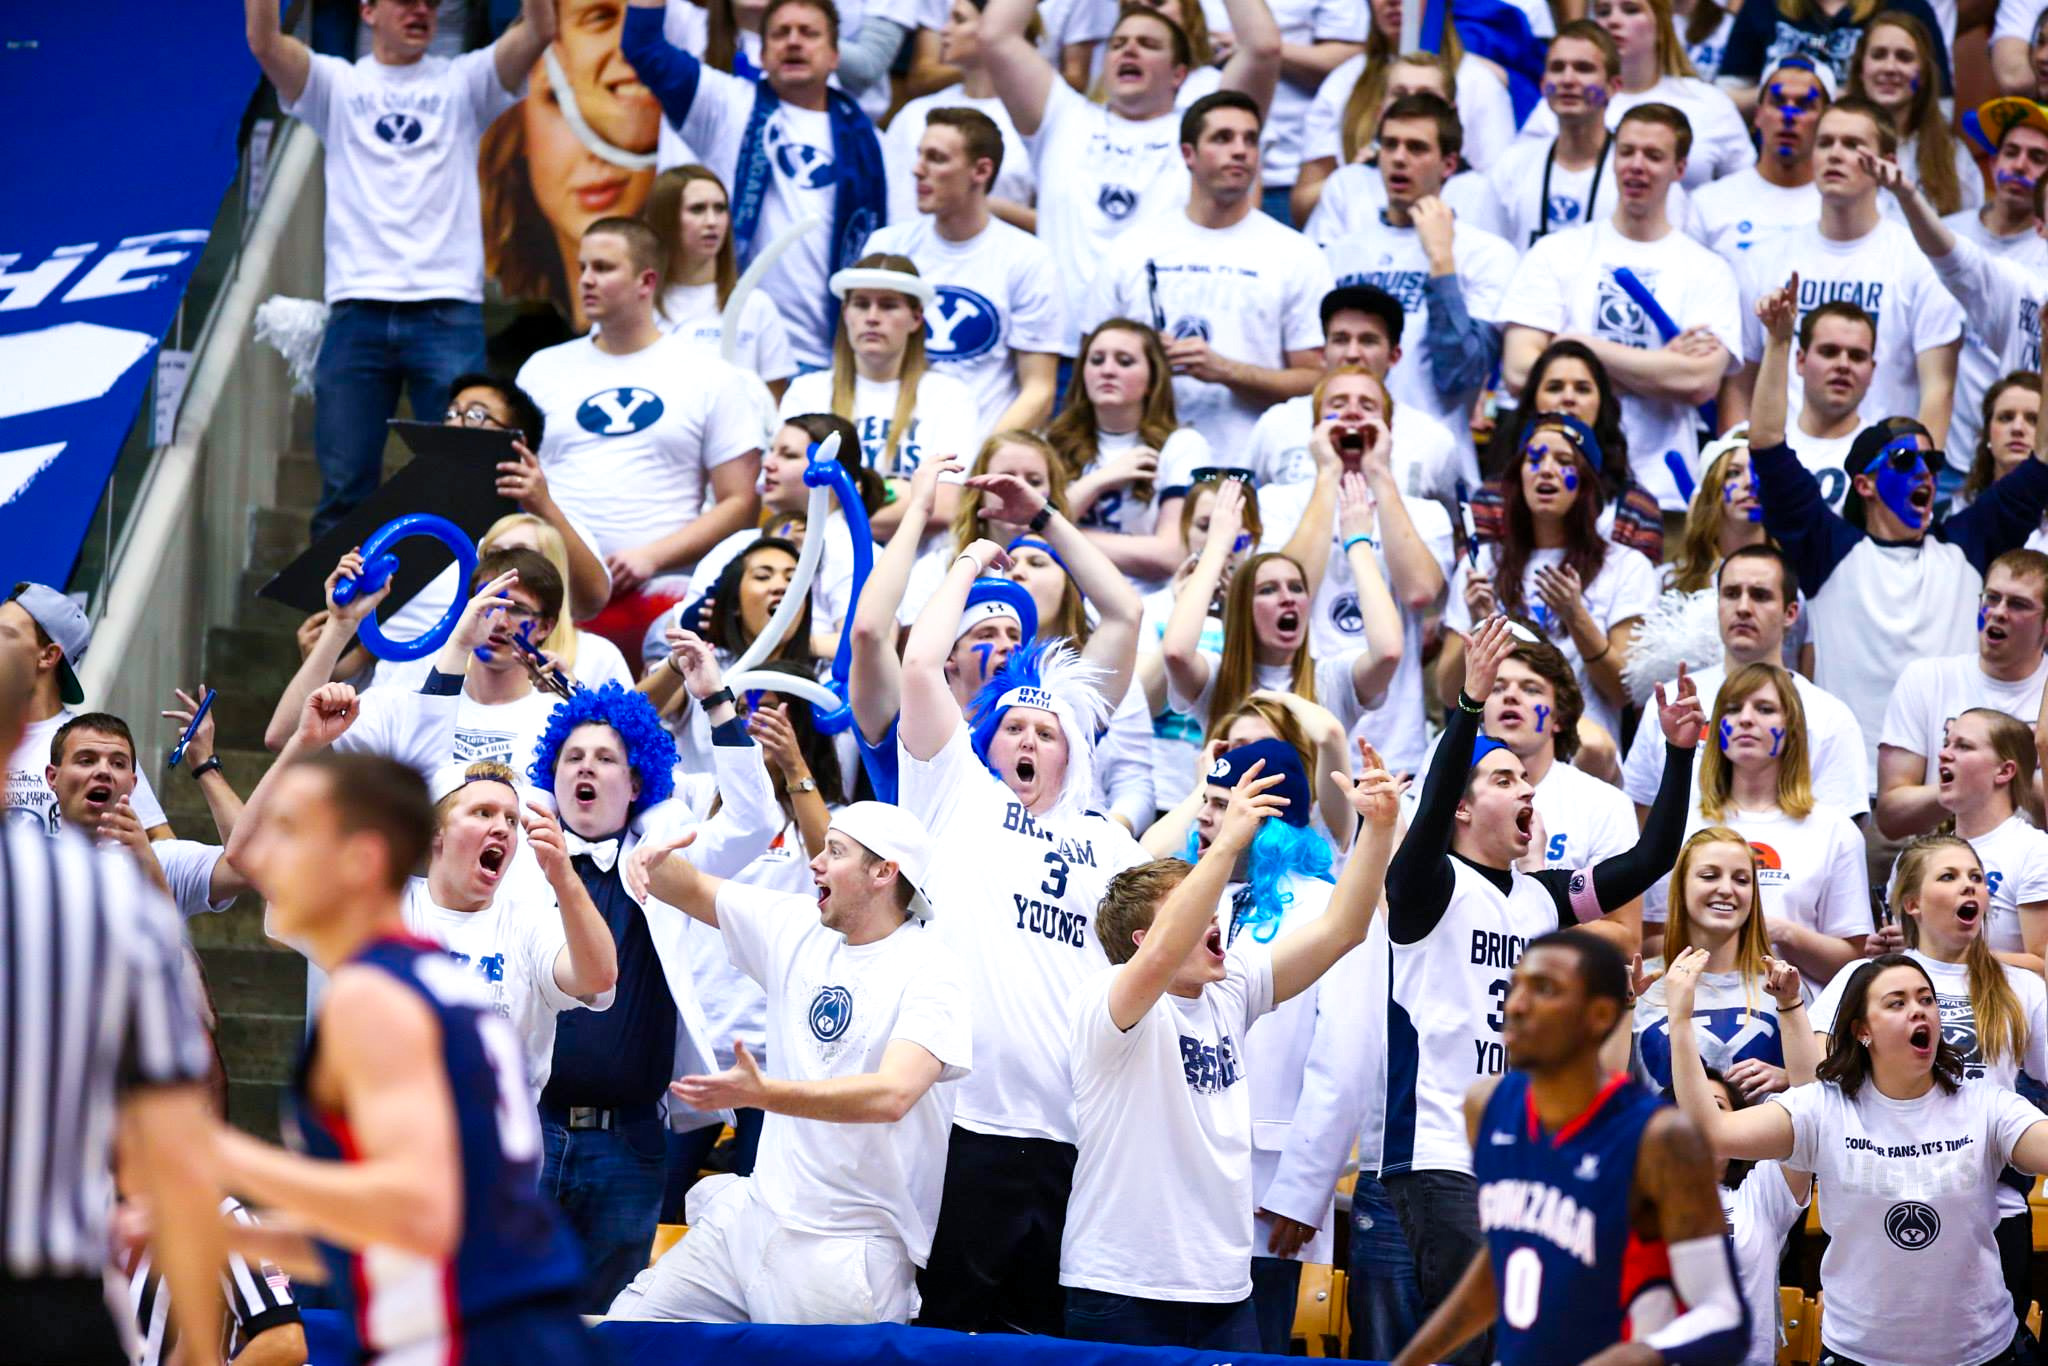 The rowdy ROC emerges as a gamechanger in BYU athletics